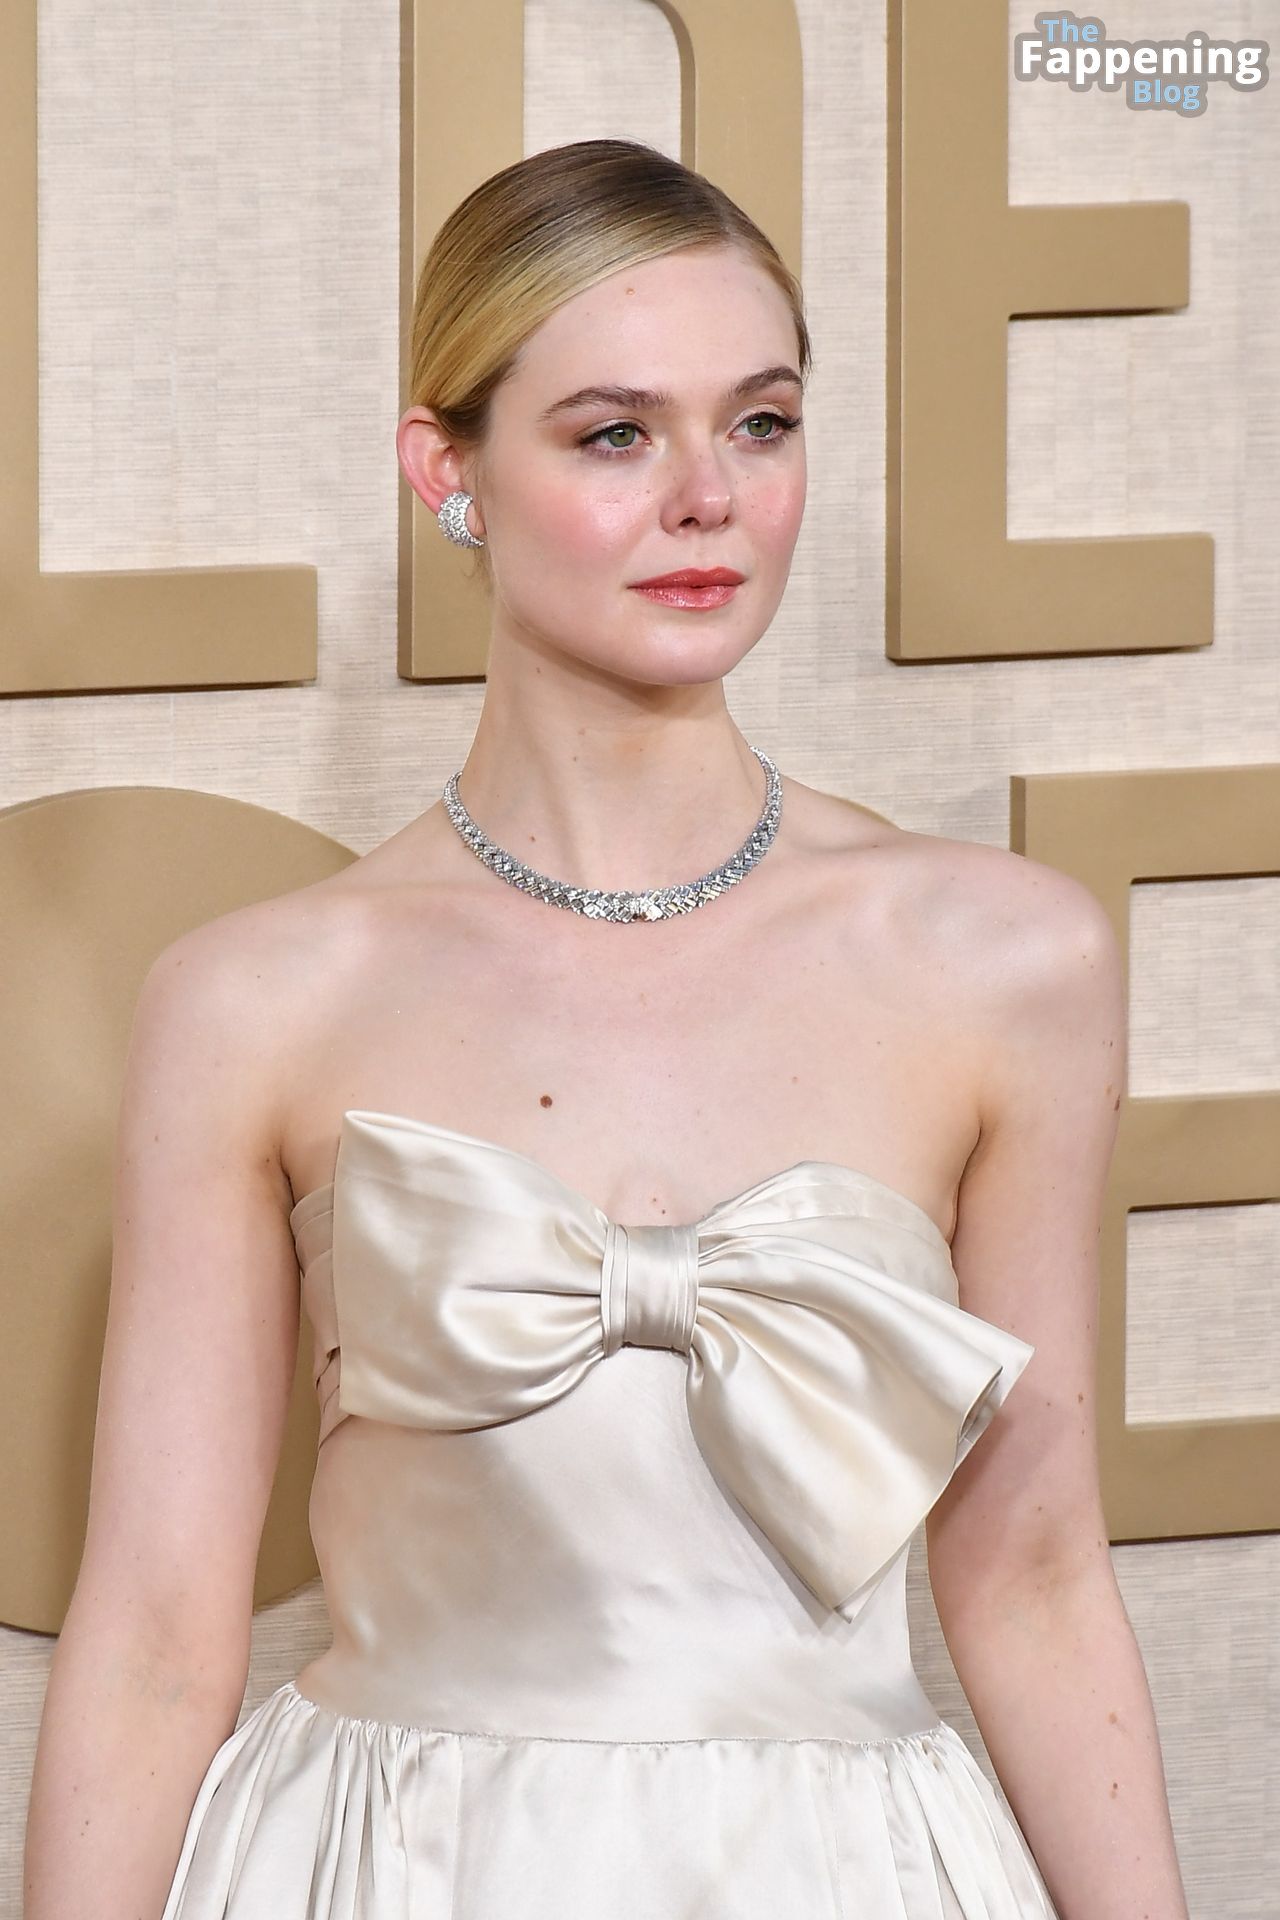 Elle-Fanning-Sexy-83-The-Fappening-Blog.jpg